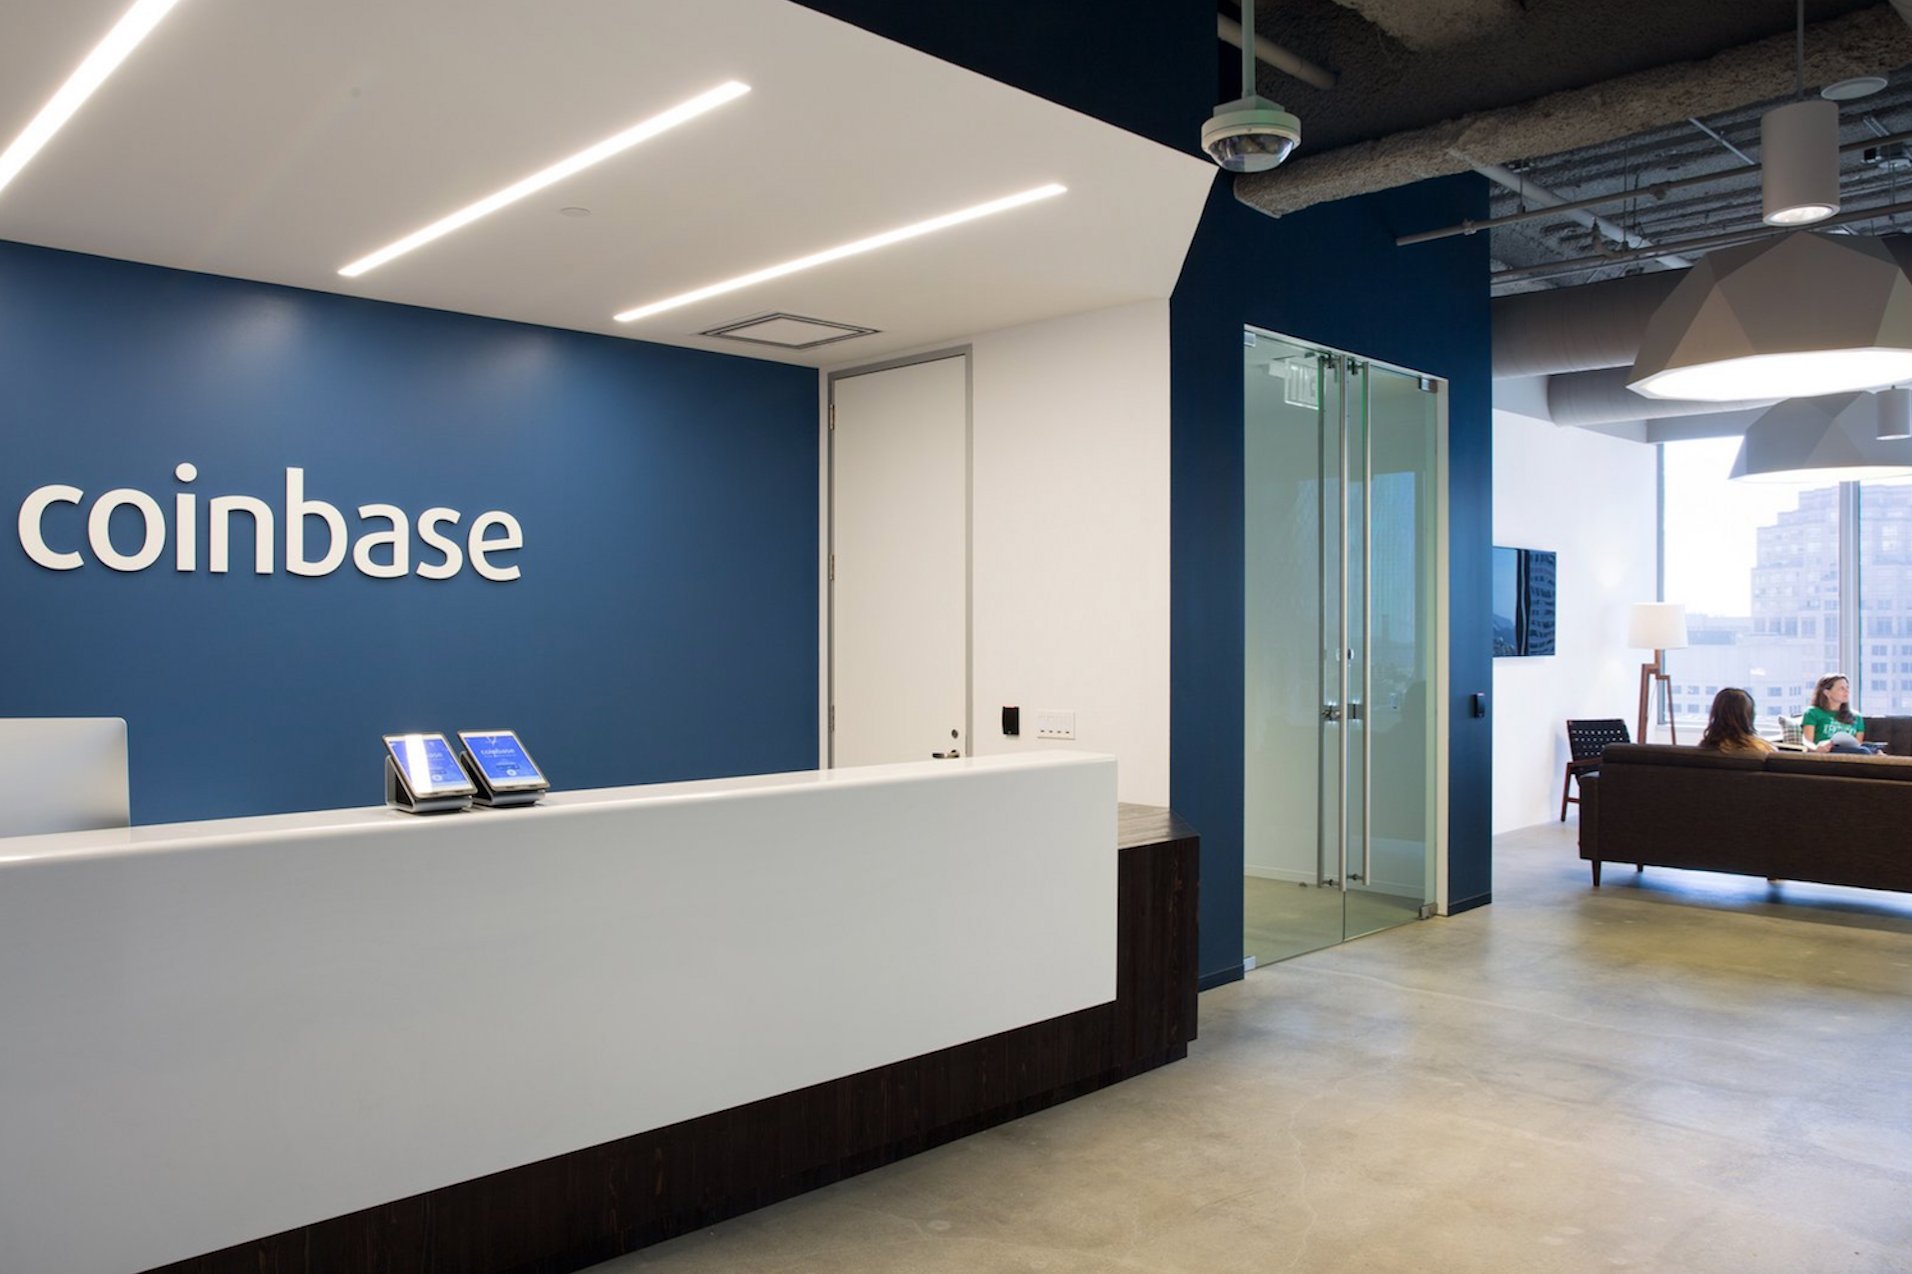  sec approval coinbase retracts claims time many 